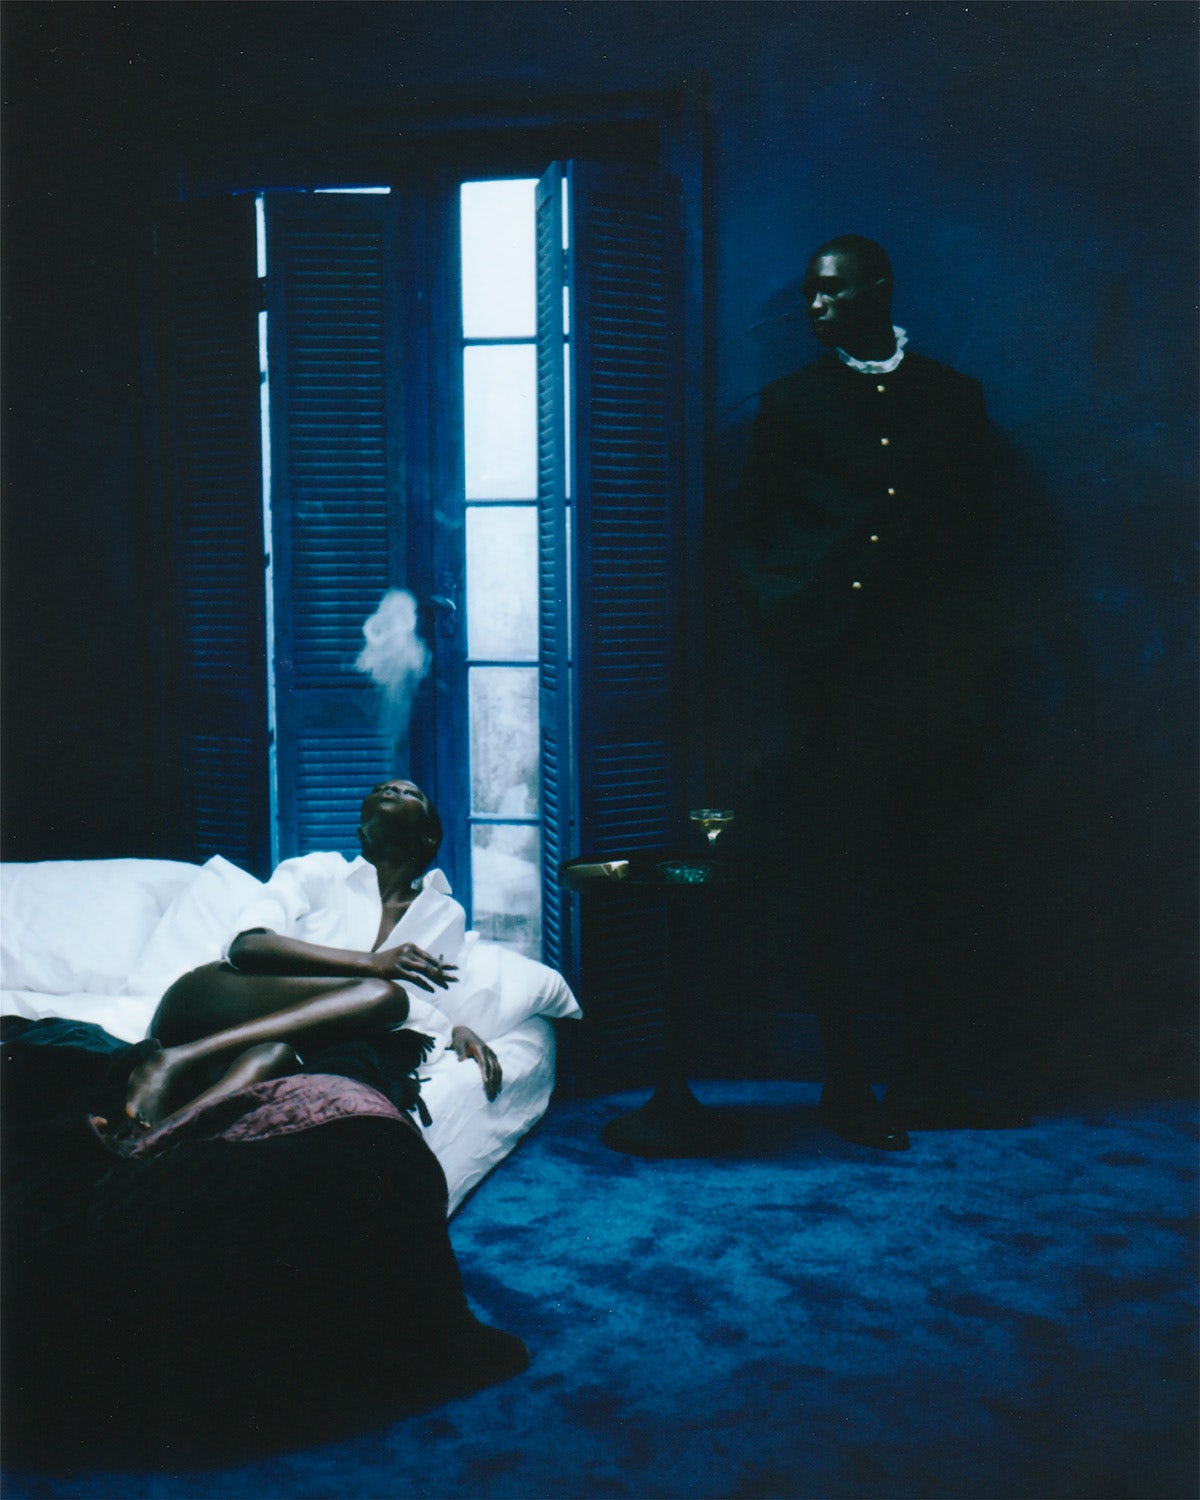 Photograph by Gabriel Moses showing a person reclining on a bed blowing smoke above their head and another person leaning against a wall in a darkened blue room